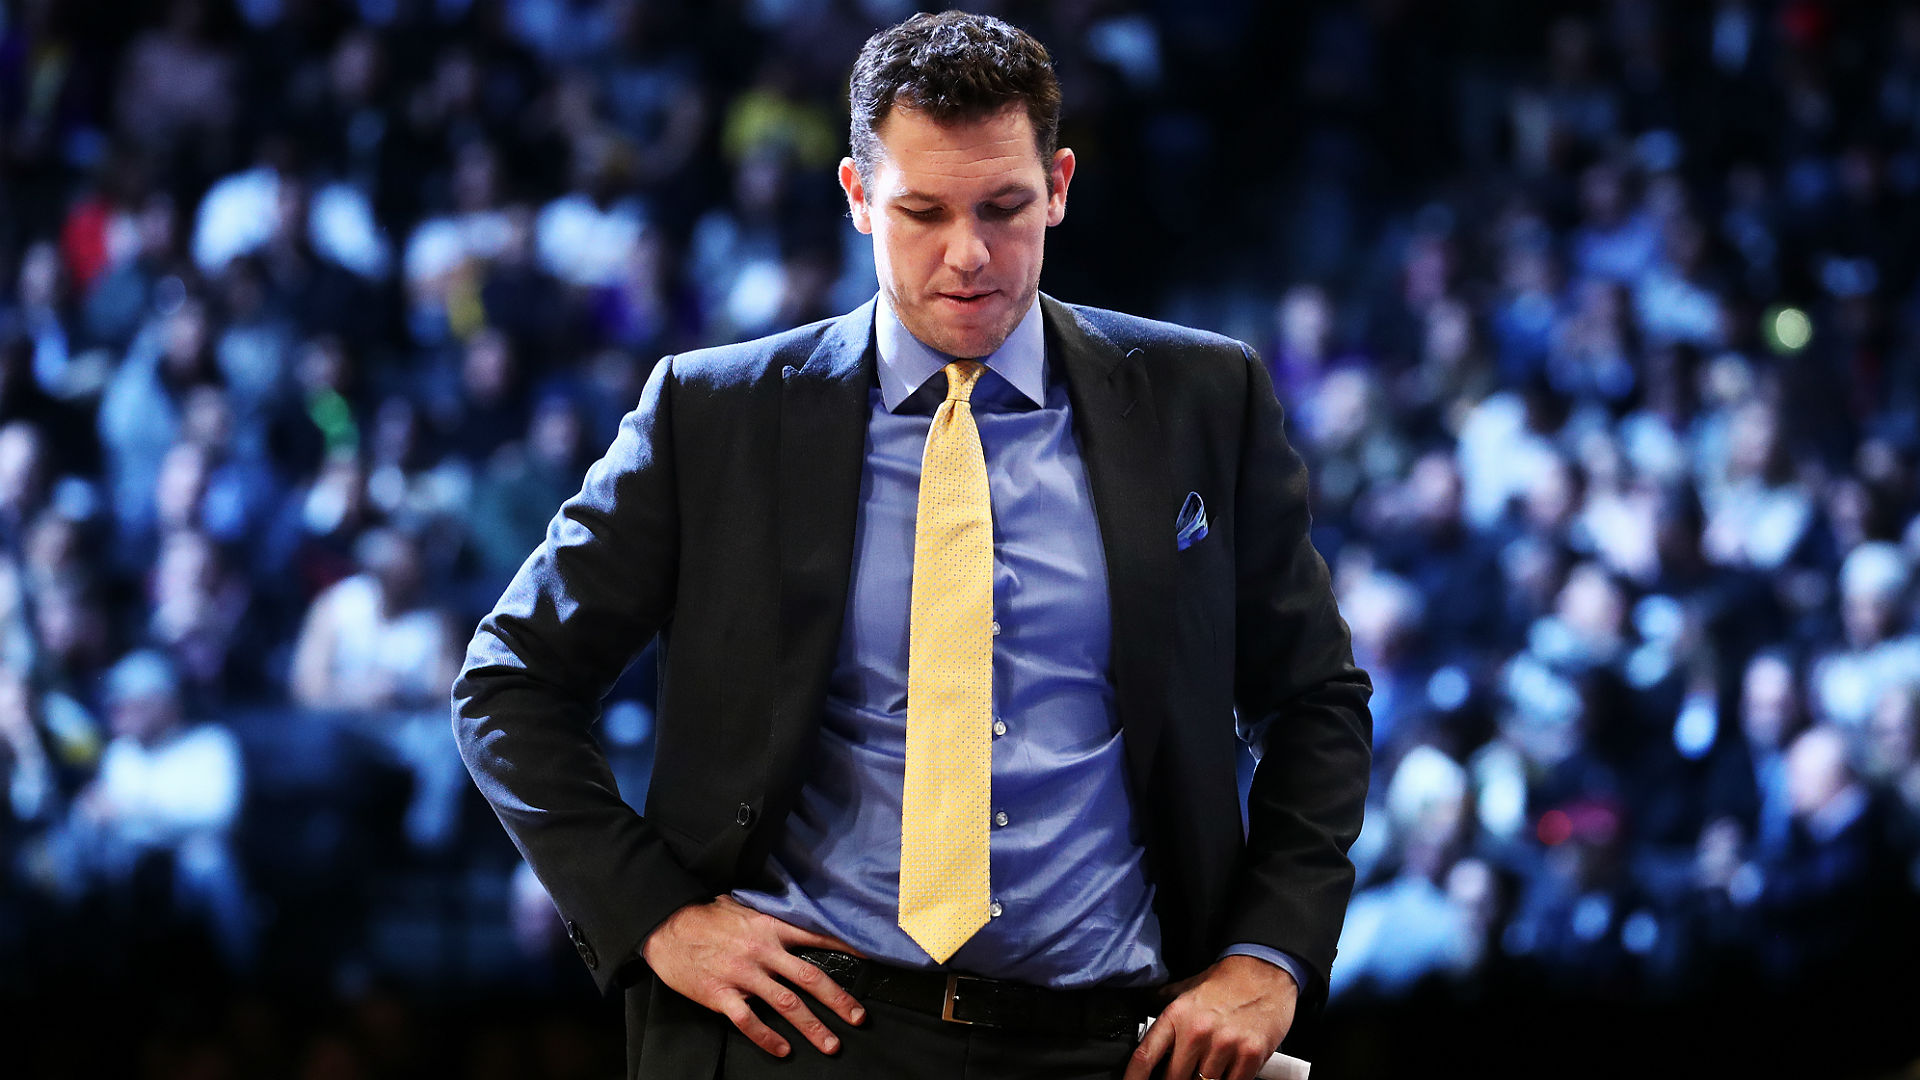 Luke Walton called for the Lakers to continue to fight, despite the team missing the NBA playoffs for the sixth straight season.